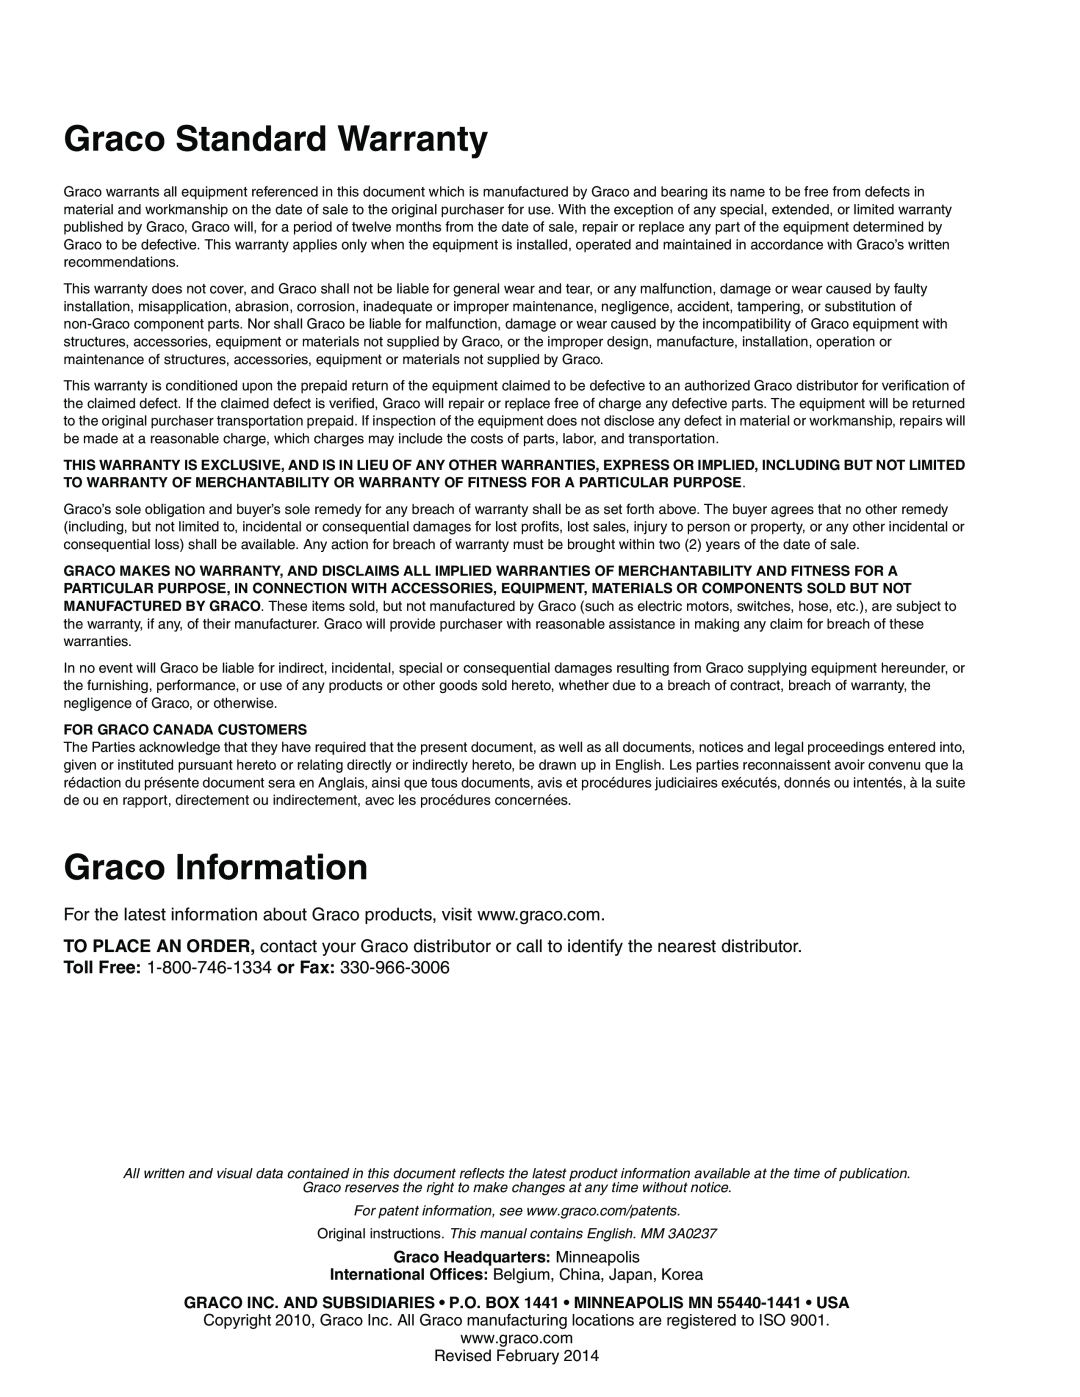 Graco 3A0237L important safety instructions Graco Standard Warranty, Graco Information, Graco Headquarters Minneapolis 